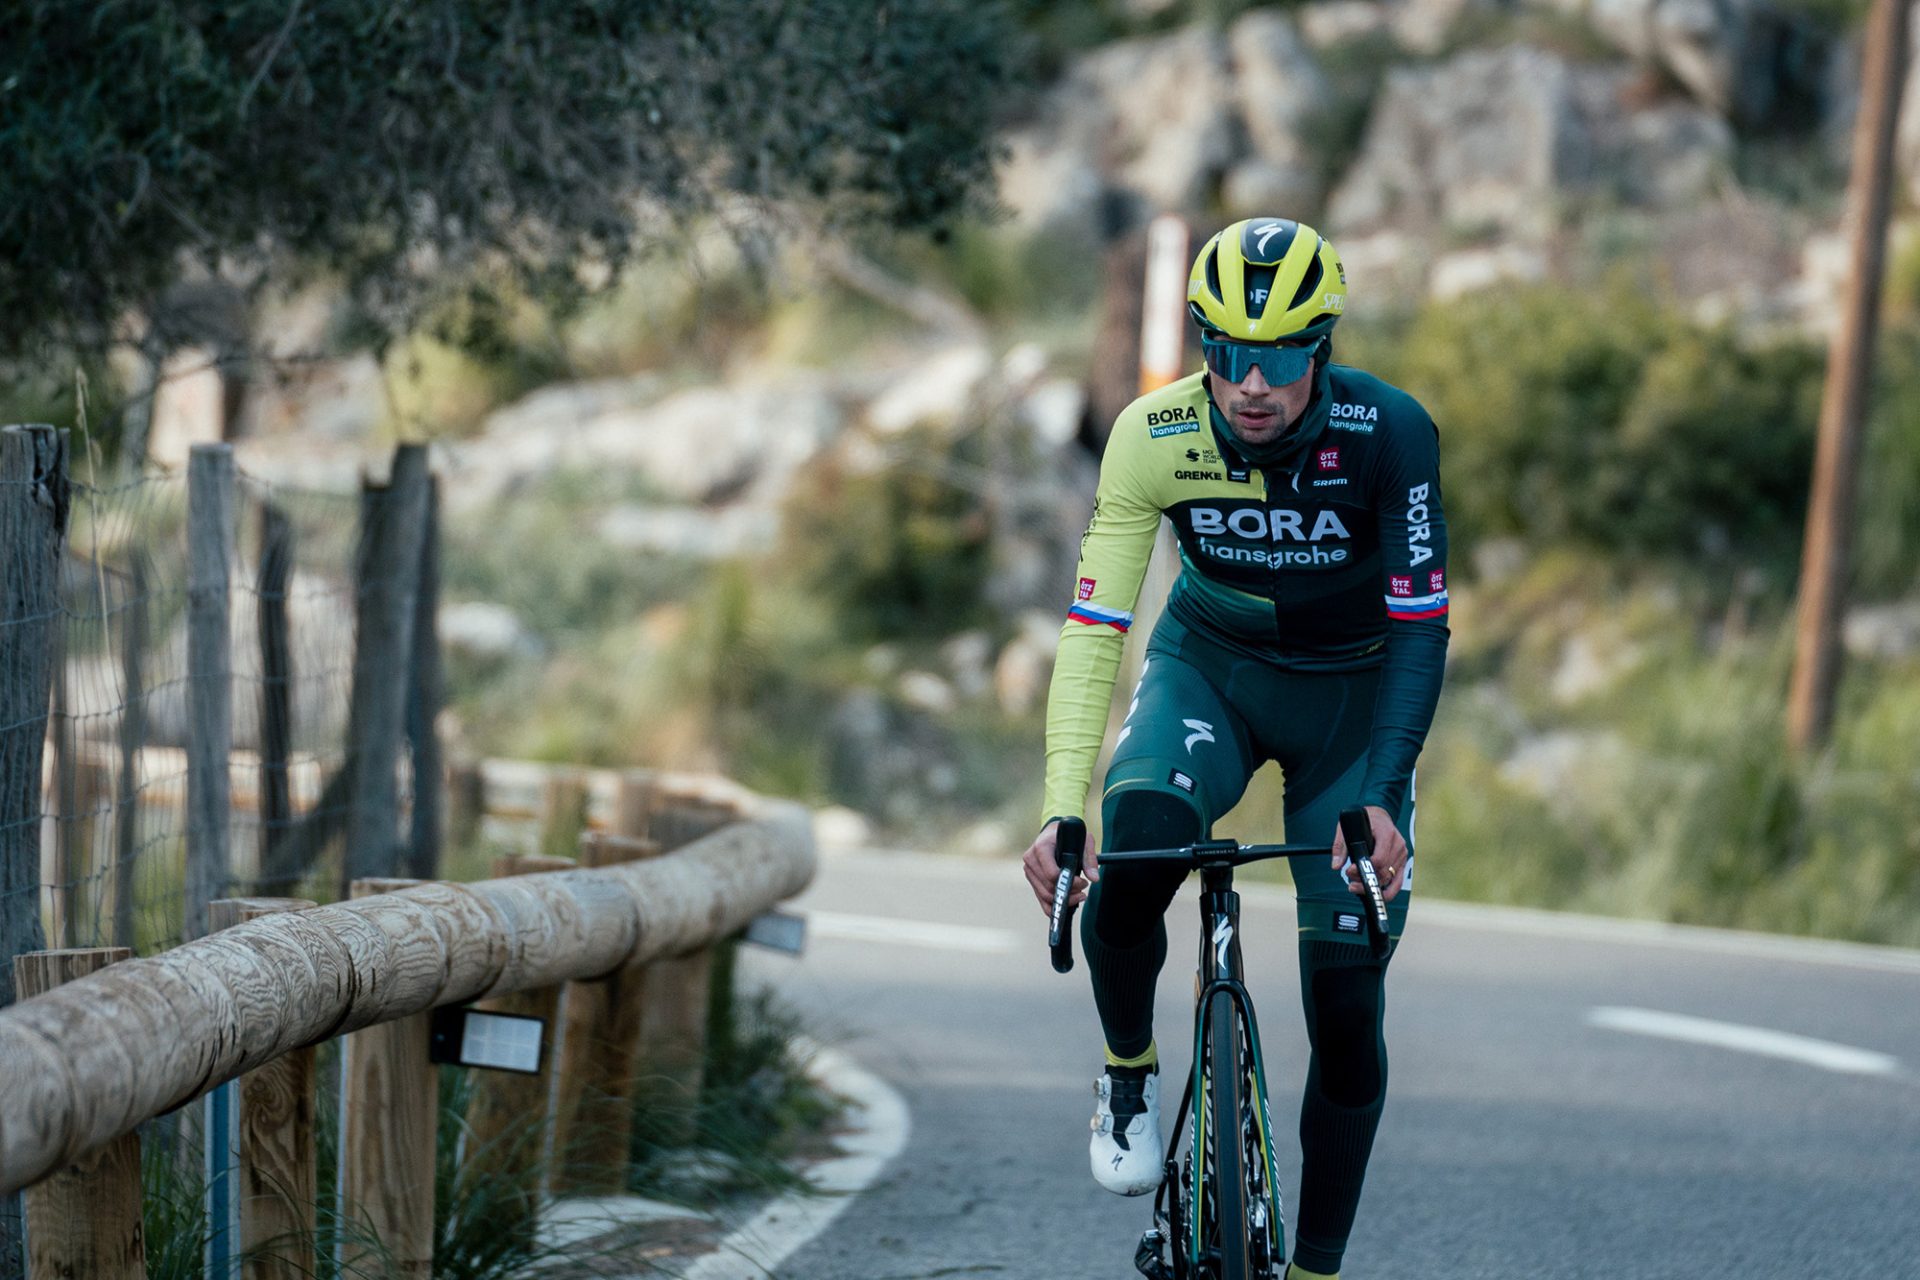 Primož Roglič trains solo. He's pictured bundled up in his new lime and green Bora-Hansgrohe kit, although the blurred landscape behind him suggests Spain rather than Slovenia.